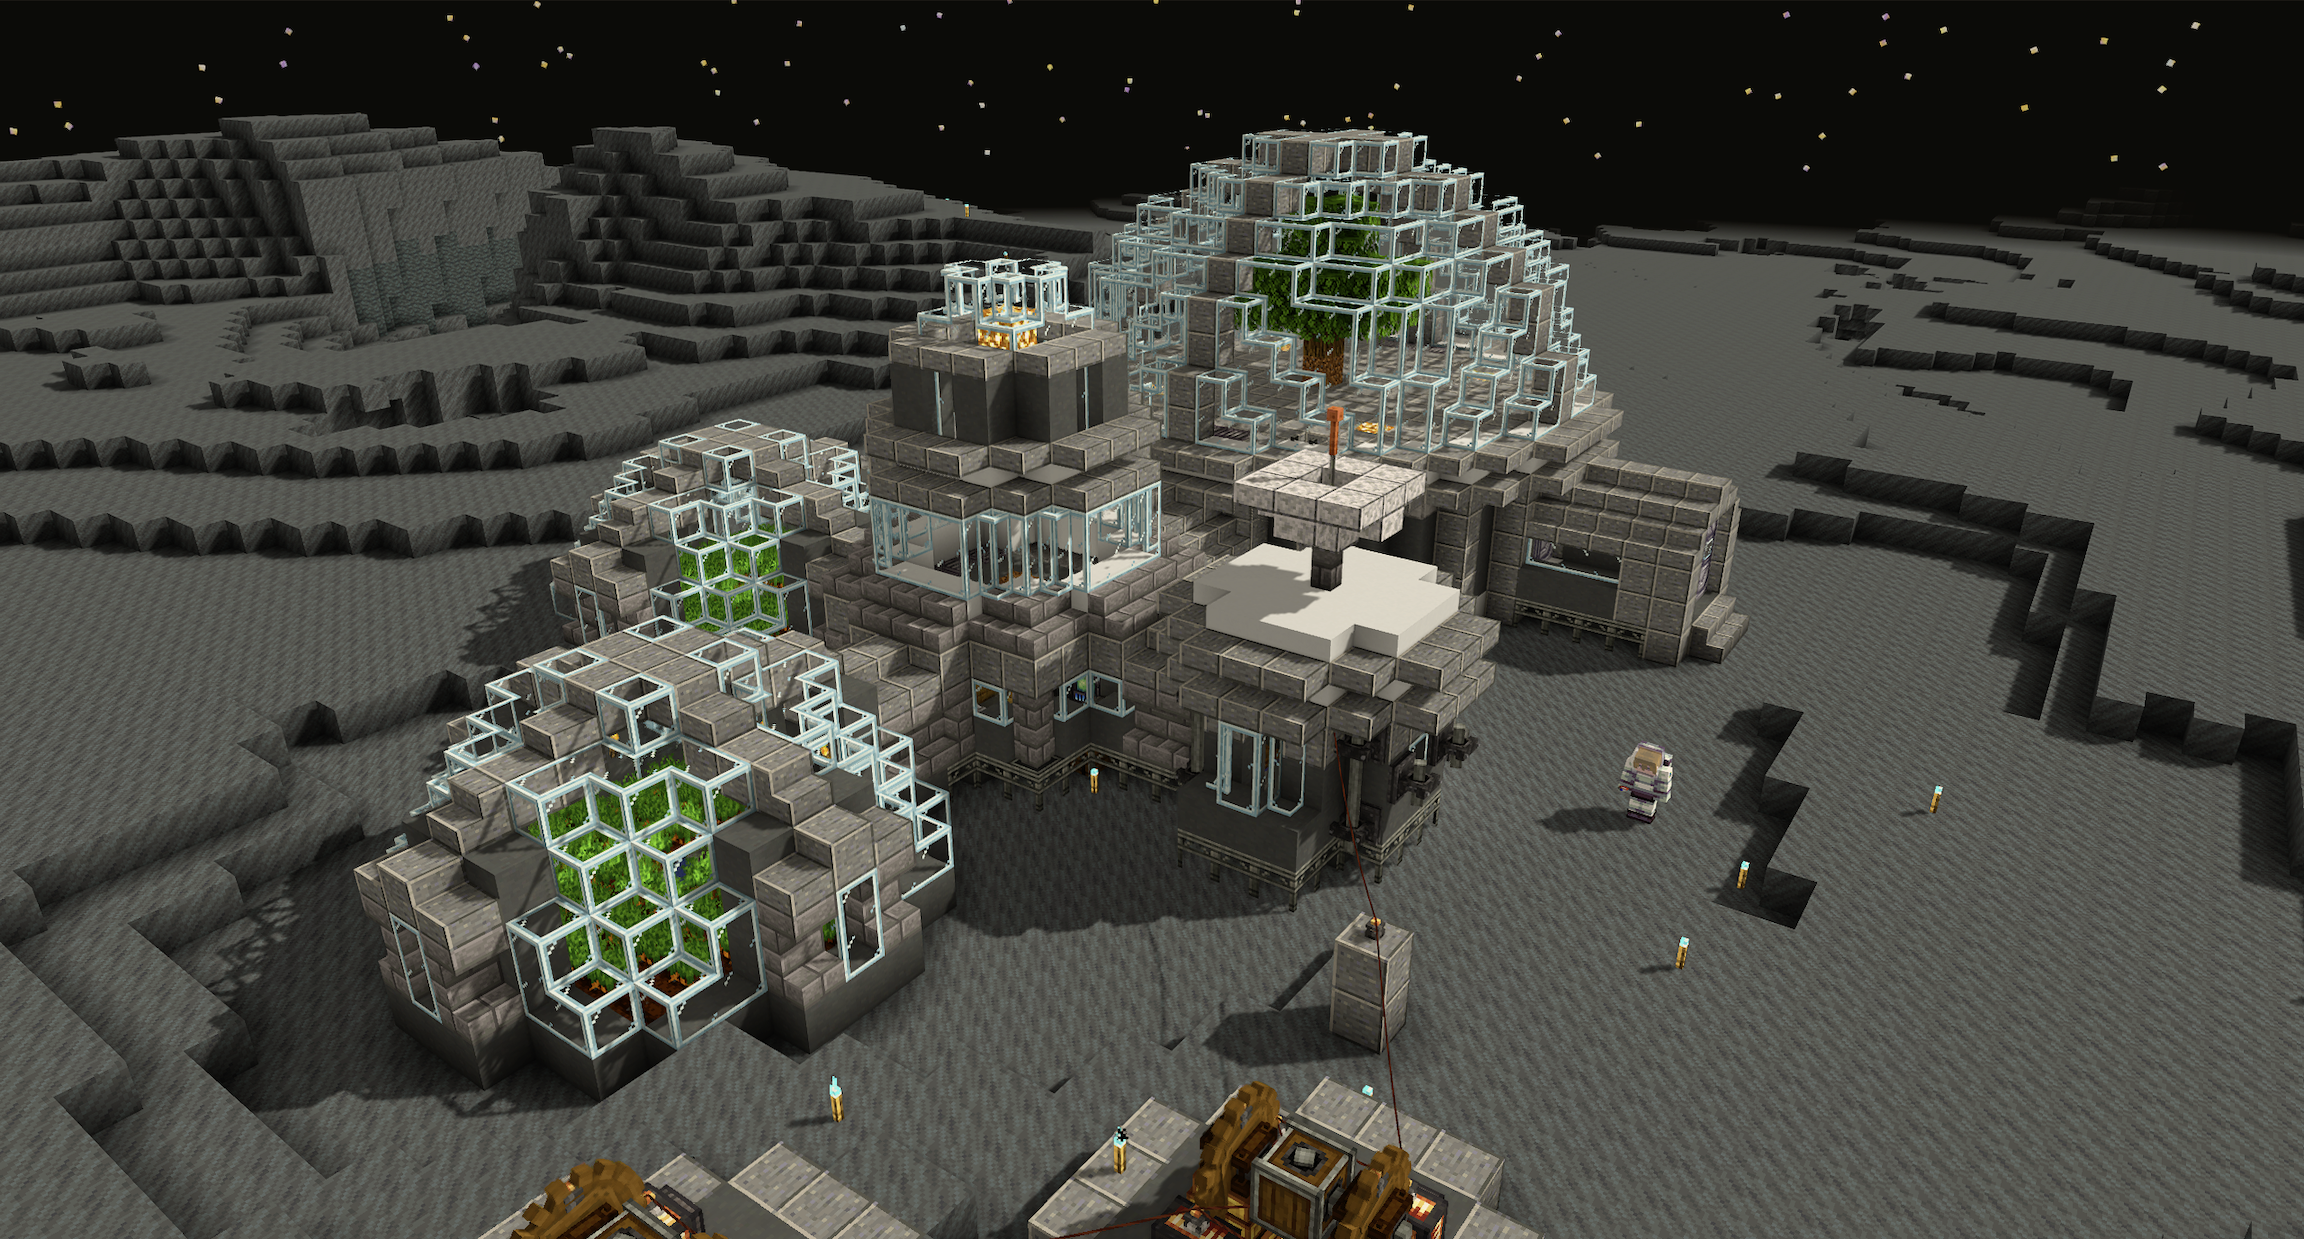 Another moon base